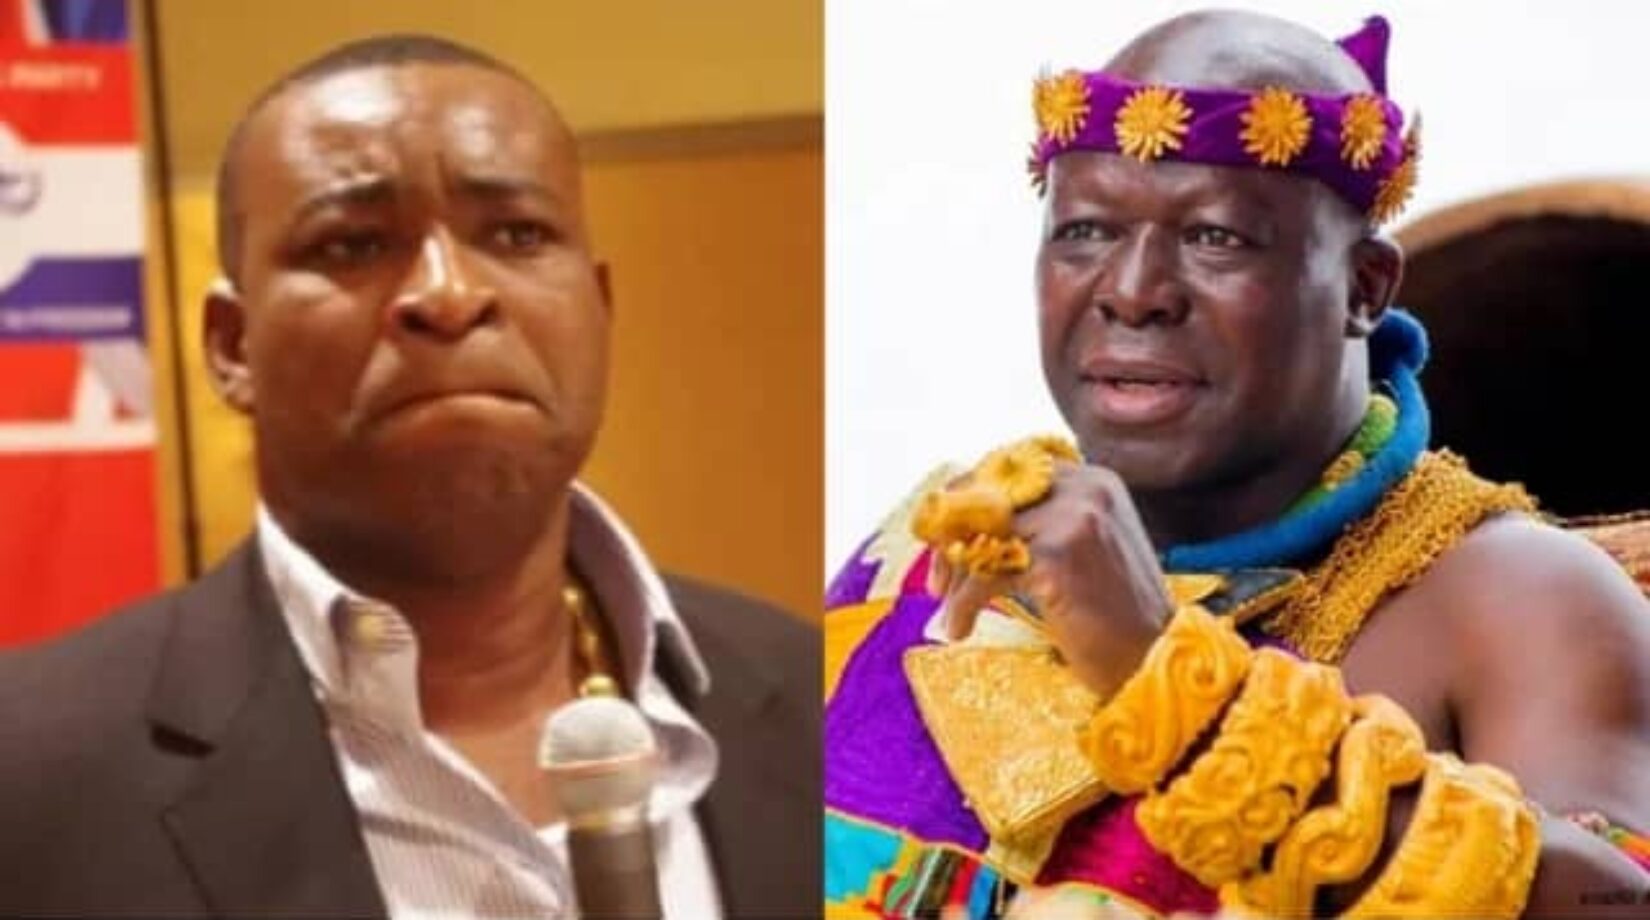 NPP Nat’L Organizer jumps to defense of Chairman Wontumi,Says he didn’t show disrespect towards Otumfuo…